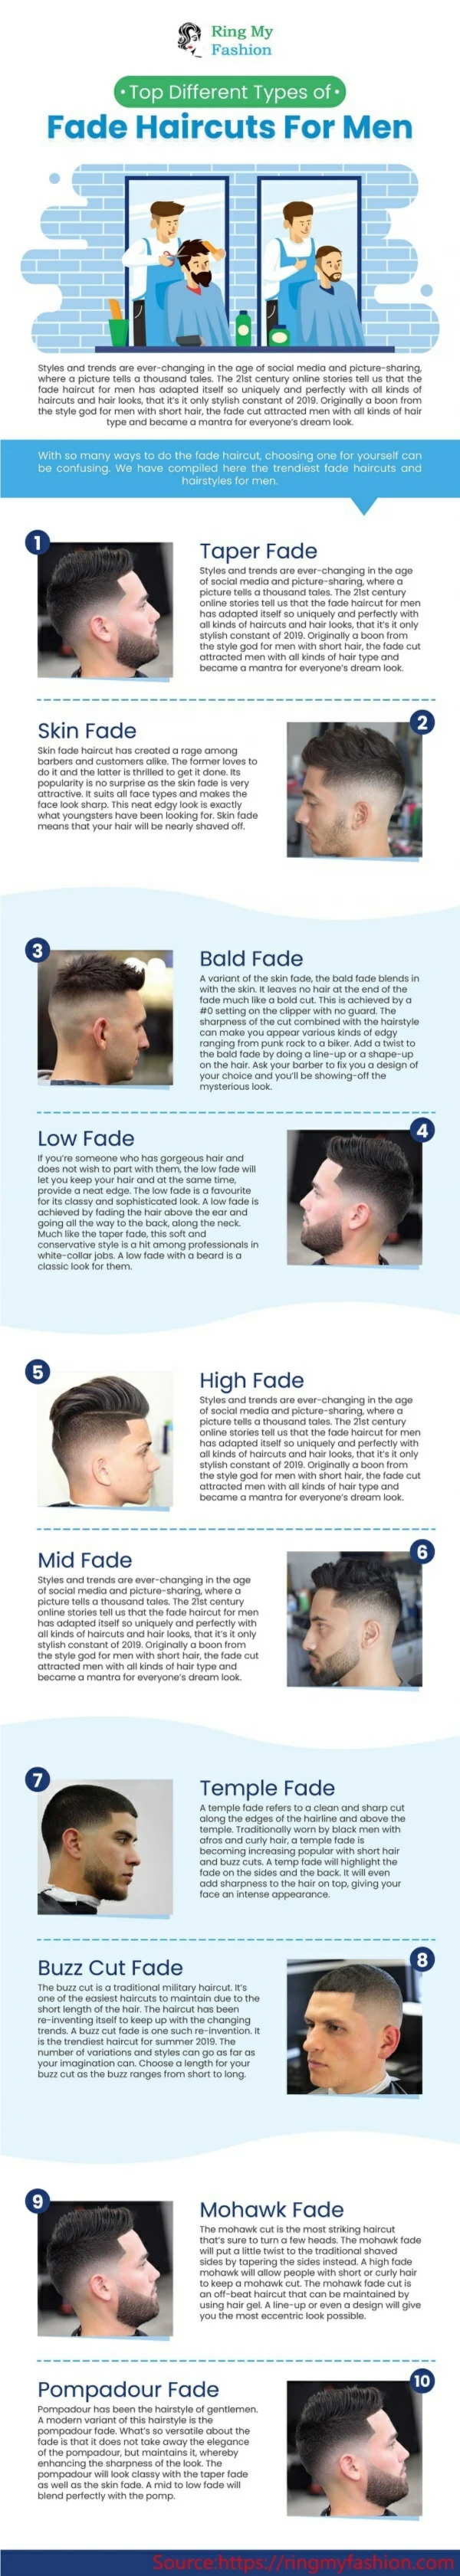 Top 10 Different Types of Fade Haircuts For Men